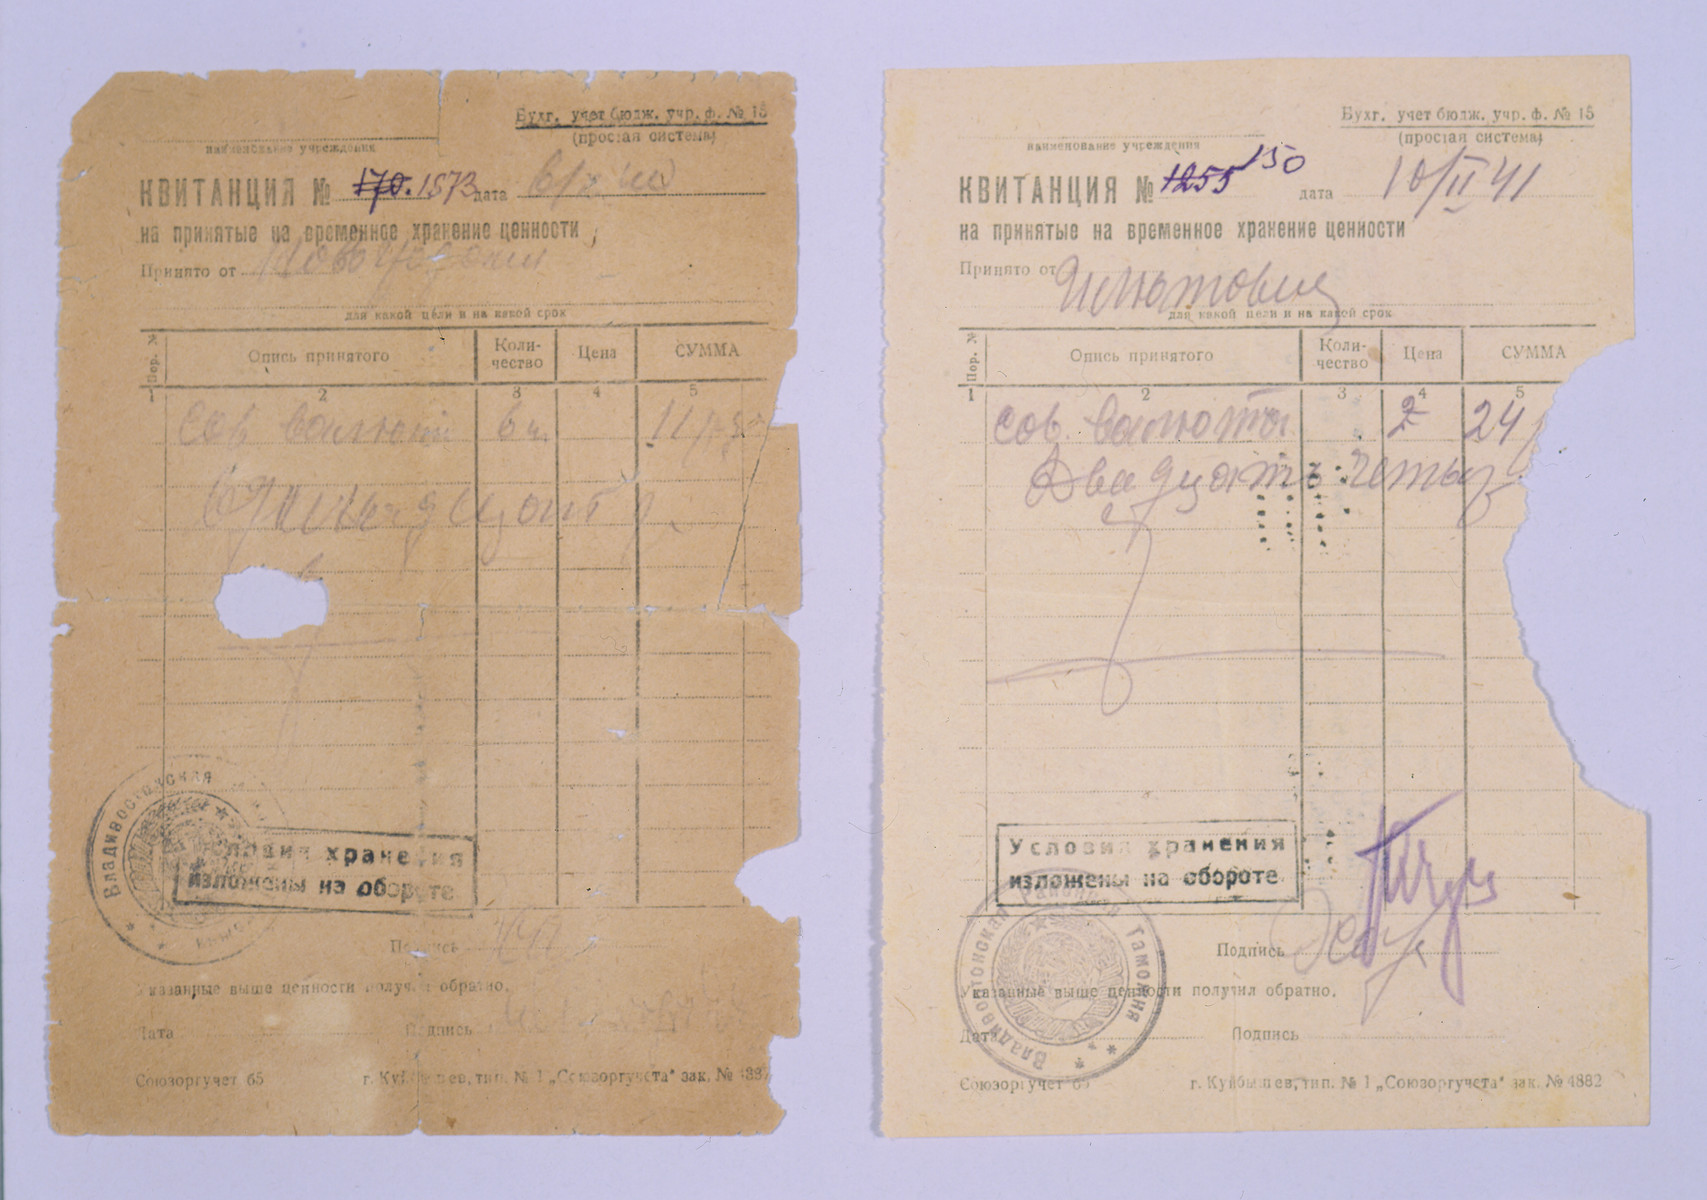 Composite photograph of two receipts for money and items confiscated from Jewish refugees in Vladivostok.

1.  A receipt for rubles confiscated from Marcus Nowogrodzki in Vladivostok. Other items, such as jewelry and valuables, were also taken. (left)

2.  A receipt for items confiscated from Rebekka Ilutovich on February 10, 1941 in Vladivostok. Exact items unknown. (right)